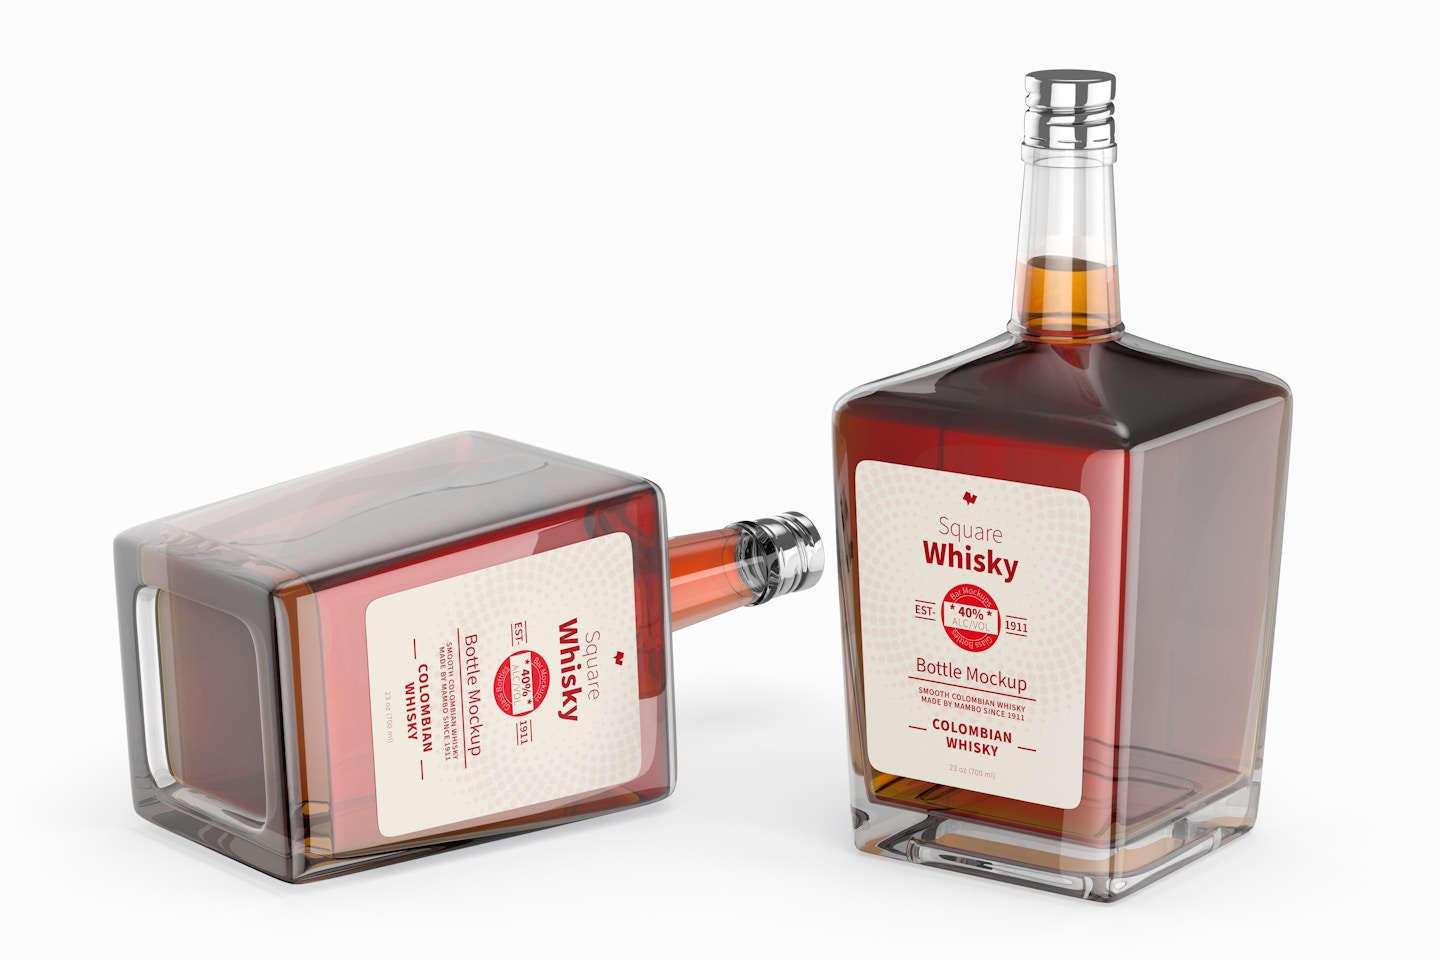 Square Whisky Bottles Mockup, Dropped and Standing